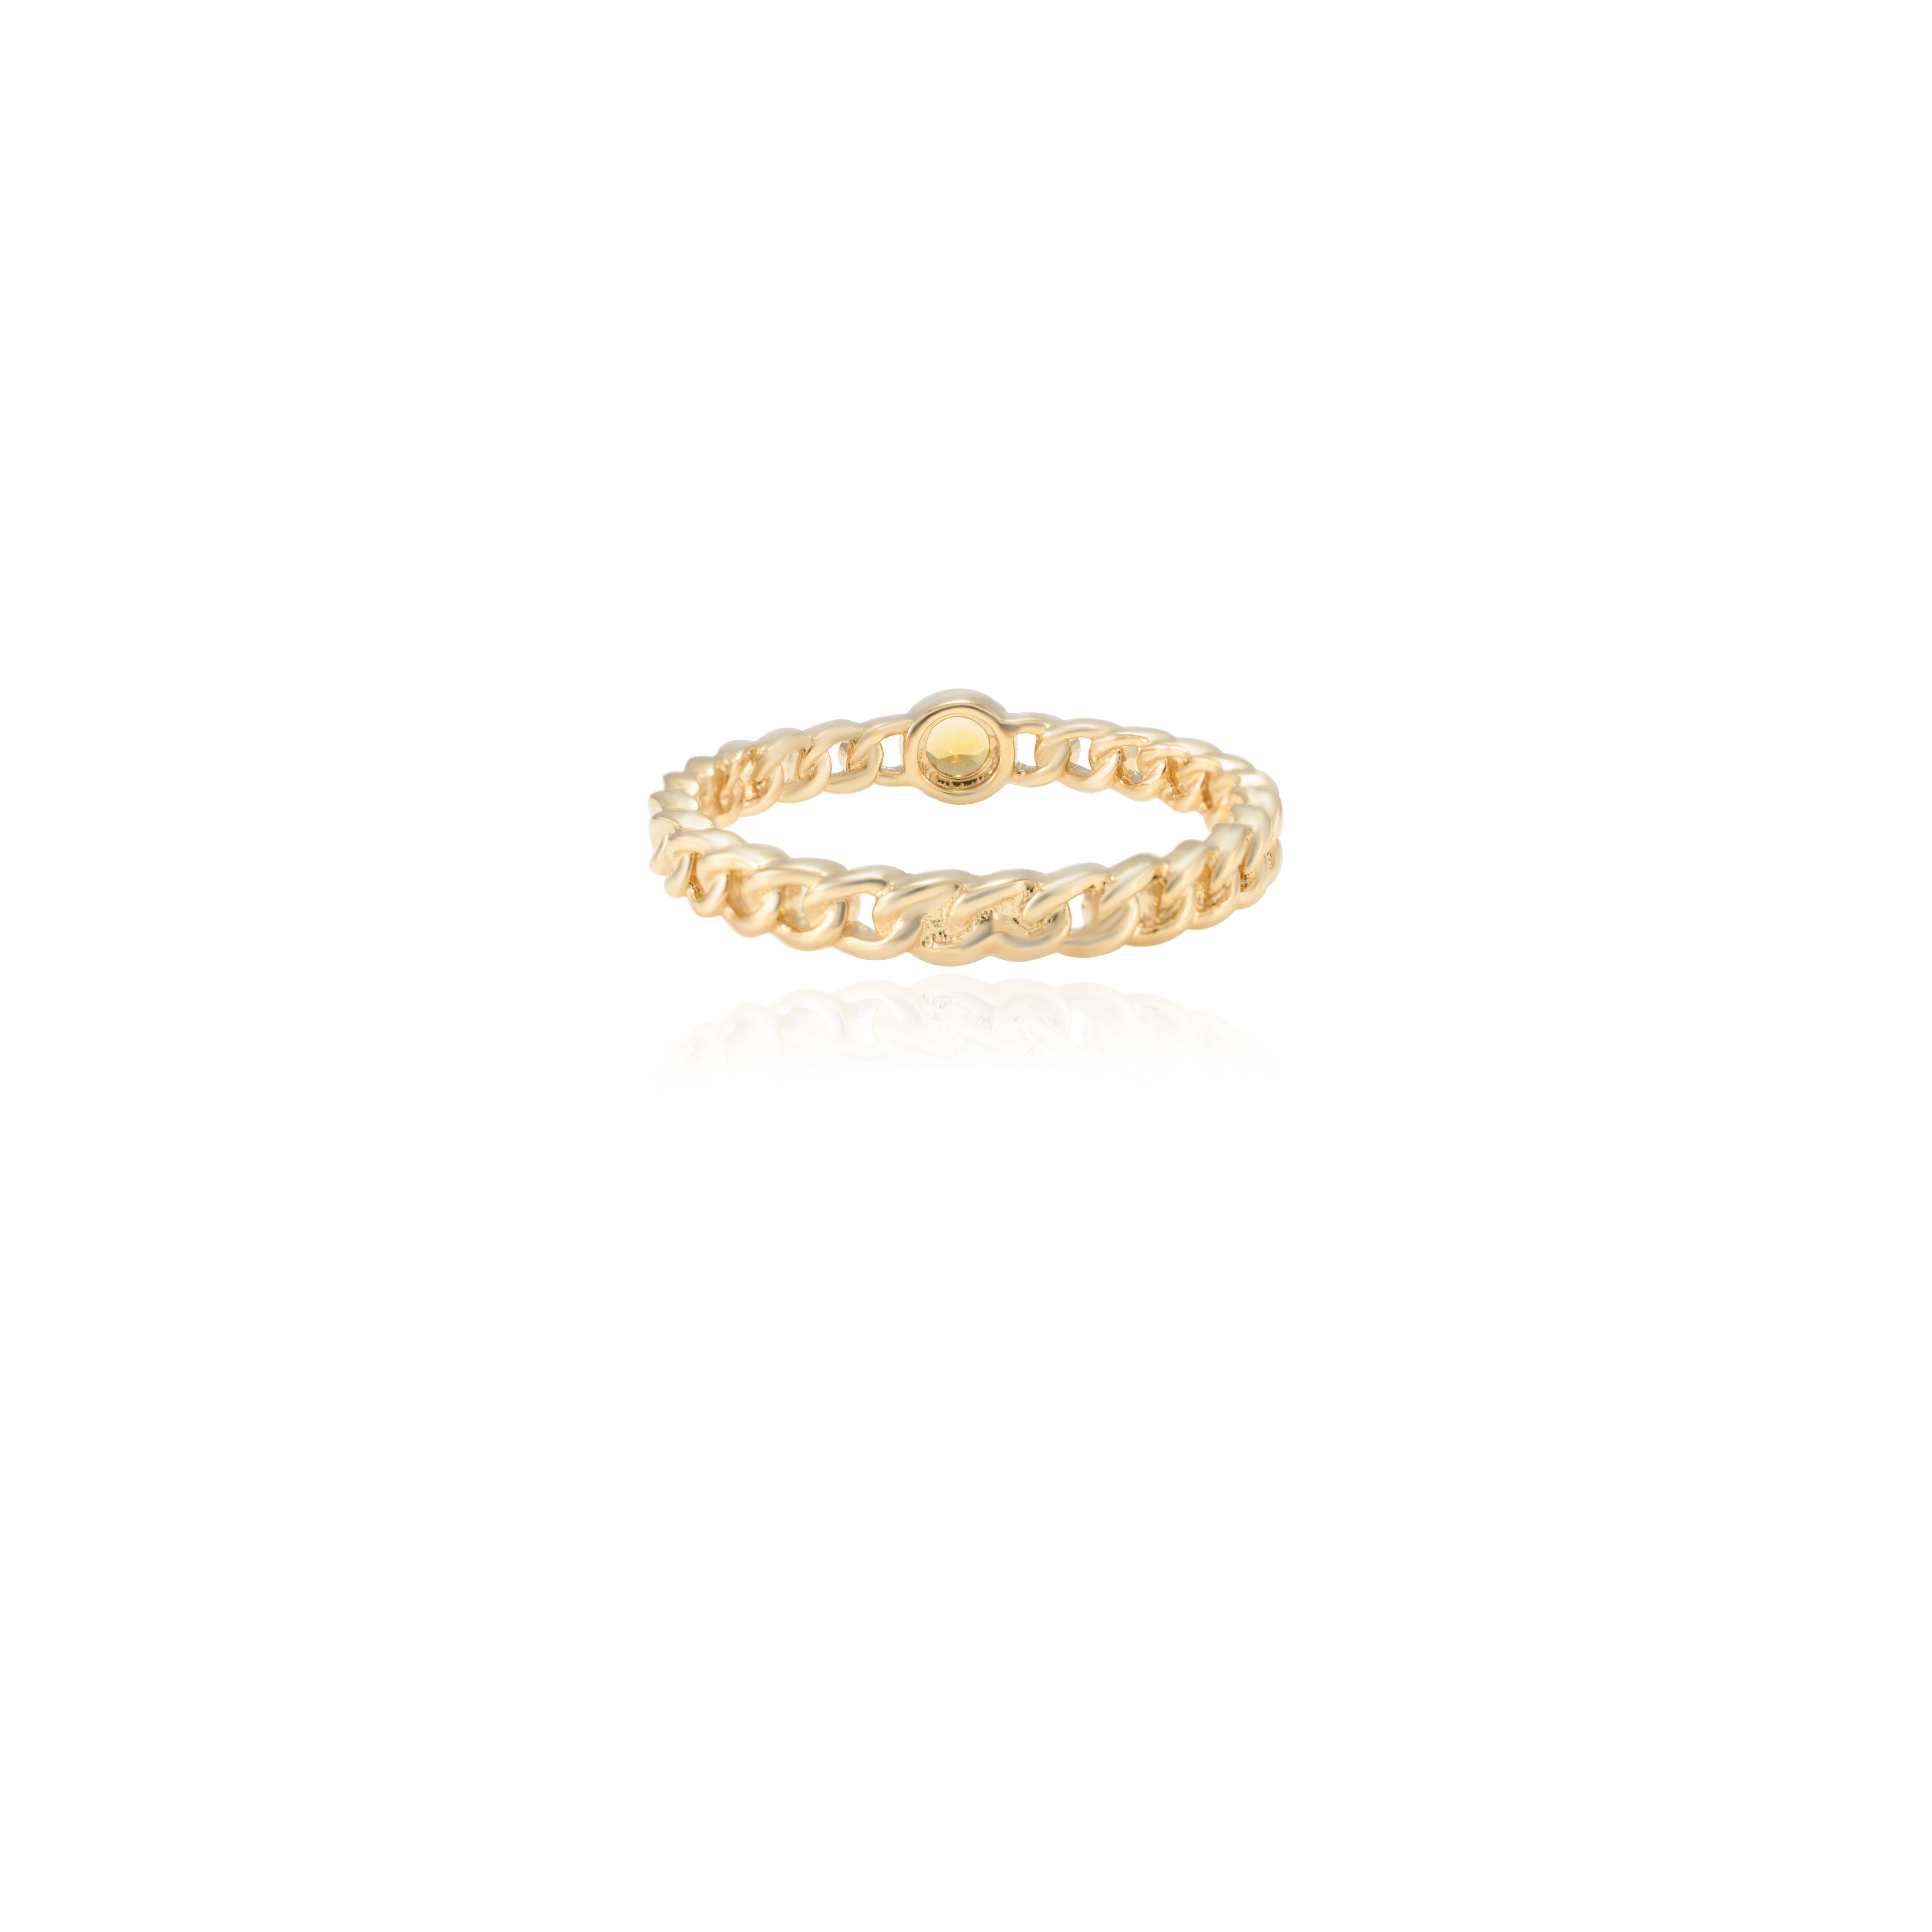 For Sale:  14k Solid Yellow Gold Dainty Round Cut Citrine Gemstone Stackable Ring 2